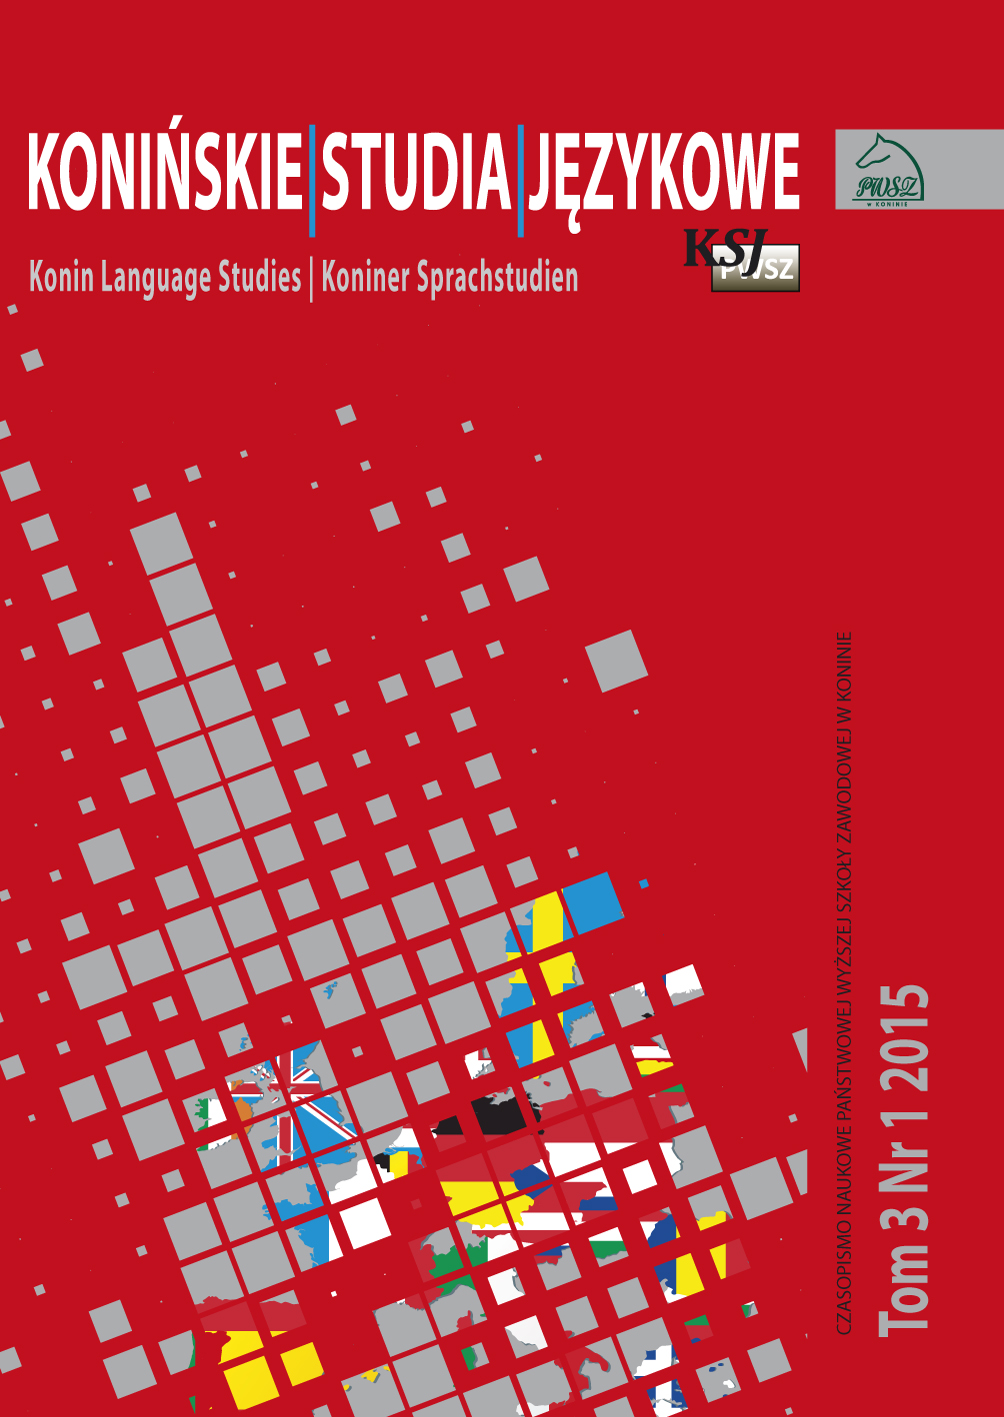 Student perceptions of multiliteracies-oriented
and traditional grammar activities: A mixed-methods case study Cover Image